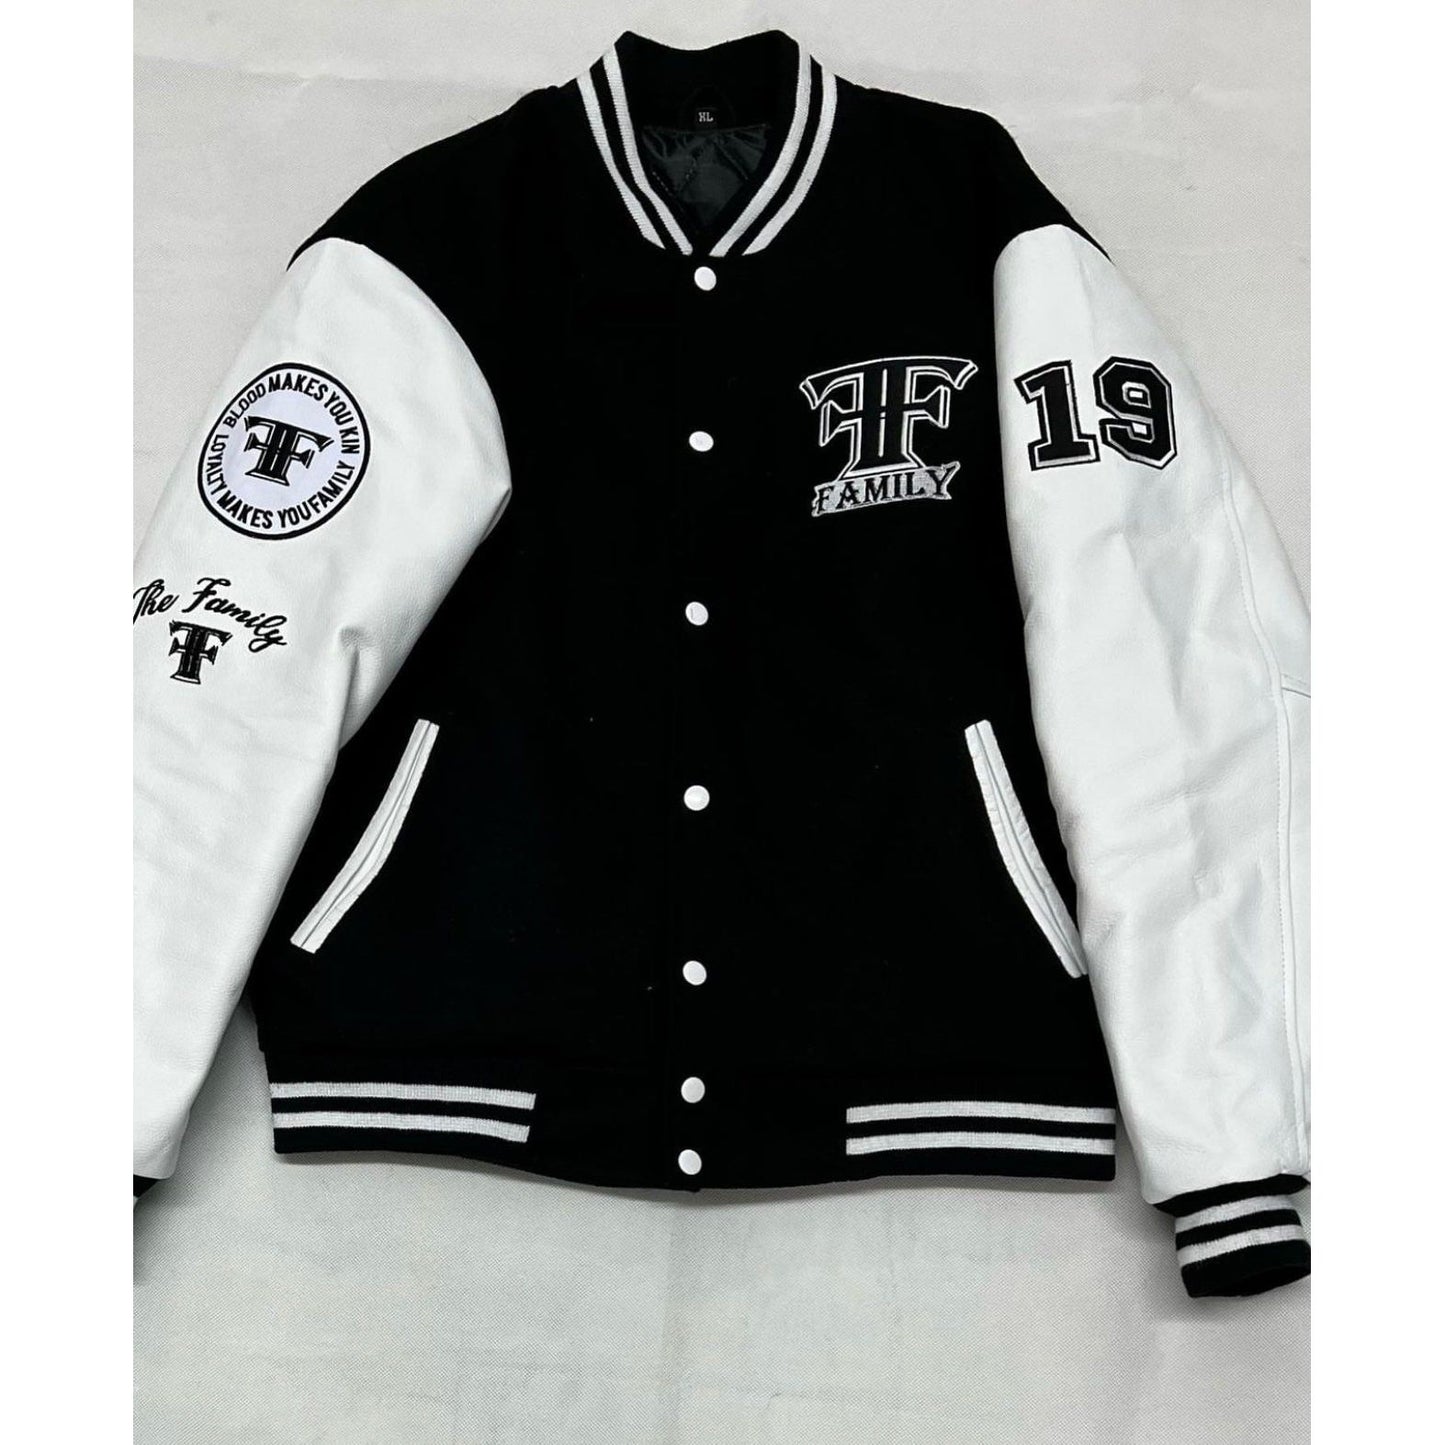 Adult unisex The Family wool with leather sleeves varsity jacket